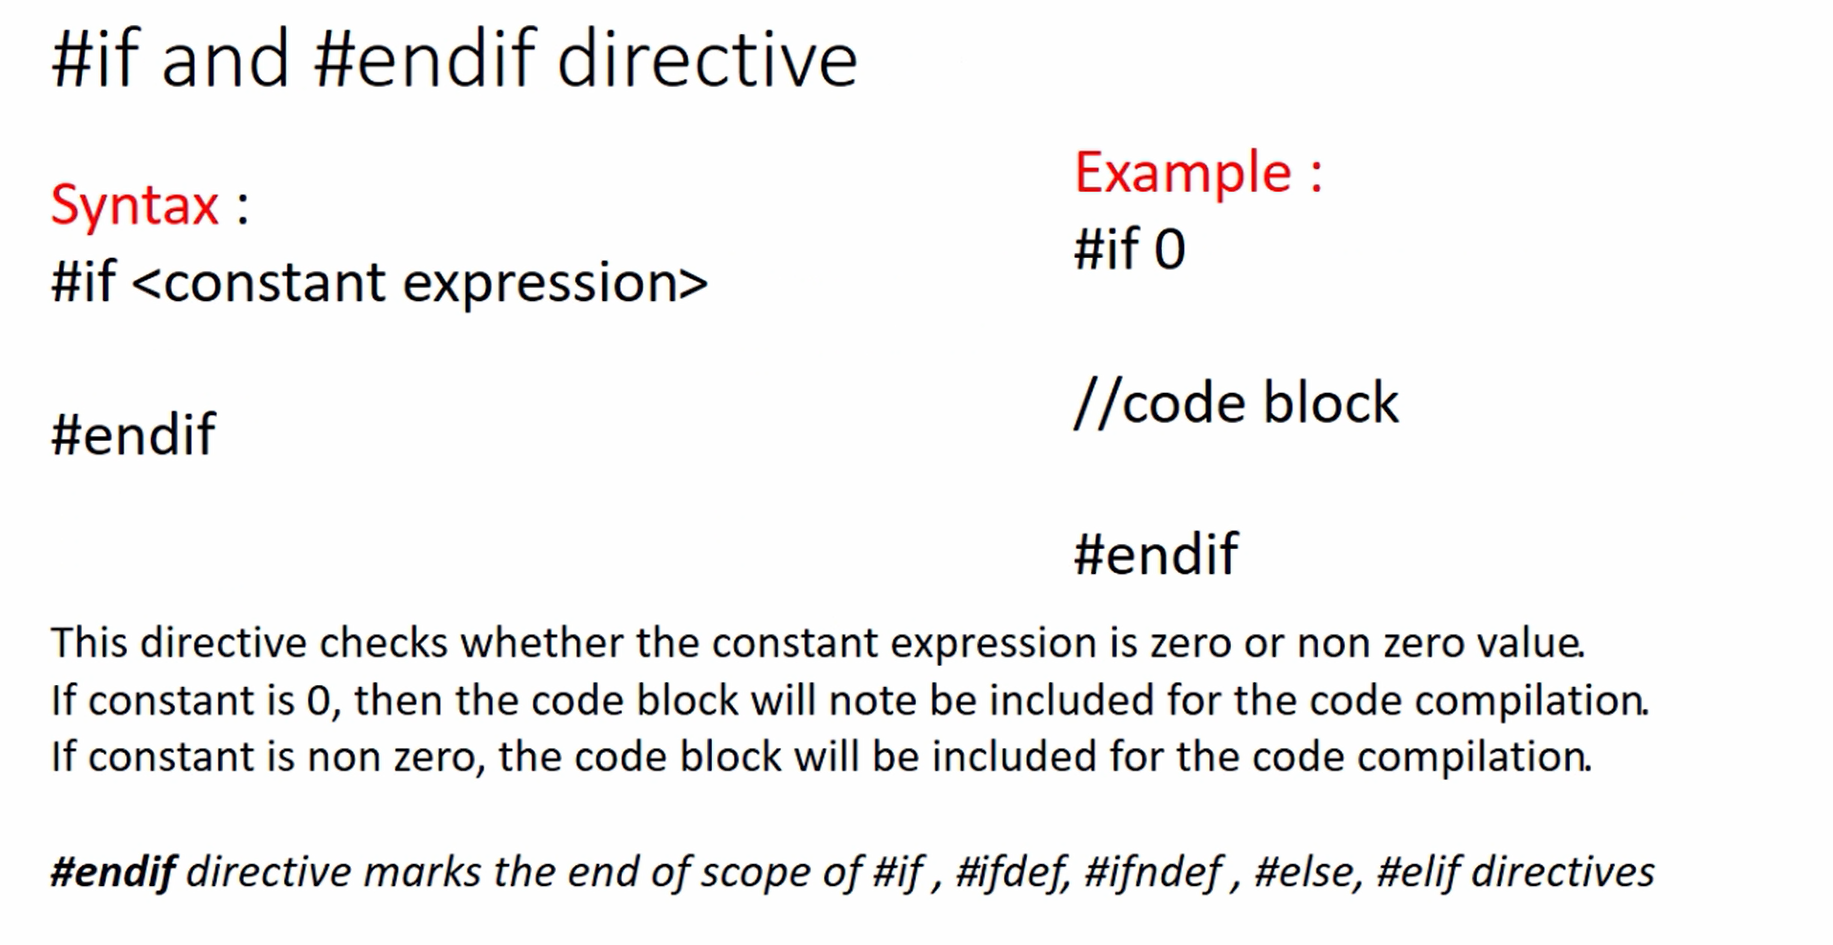 Figure 2. #if and #endif directive - Conditional compilation directives in C